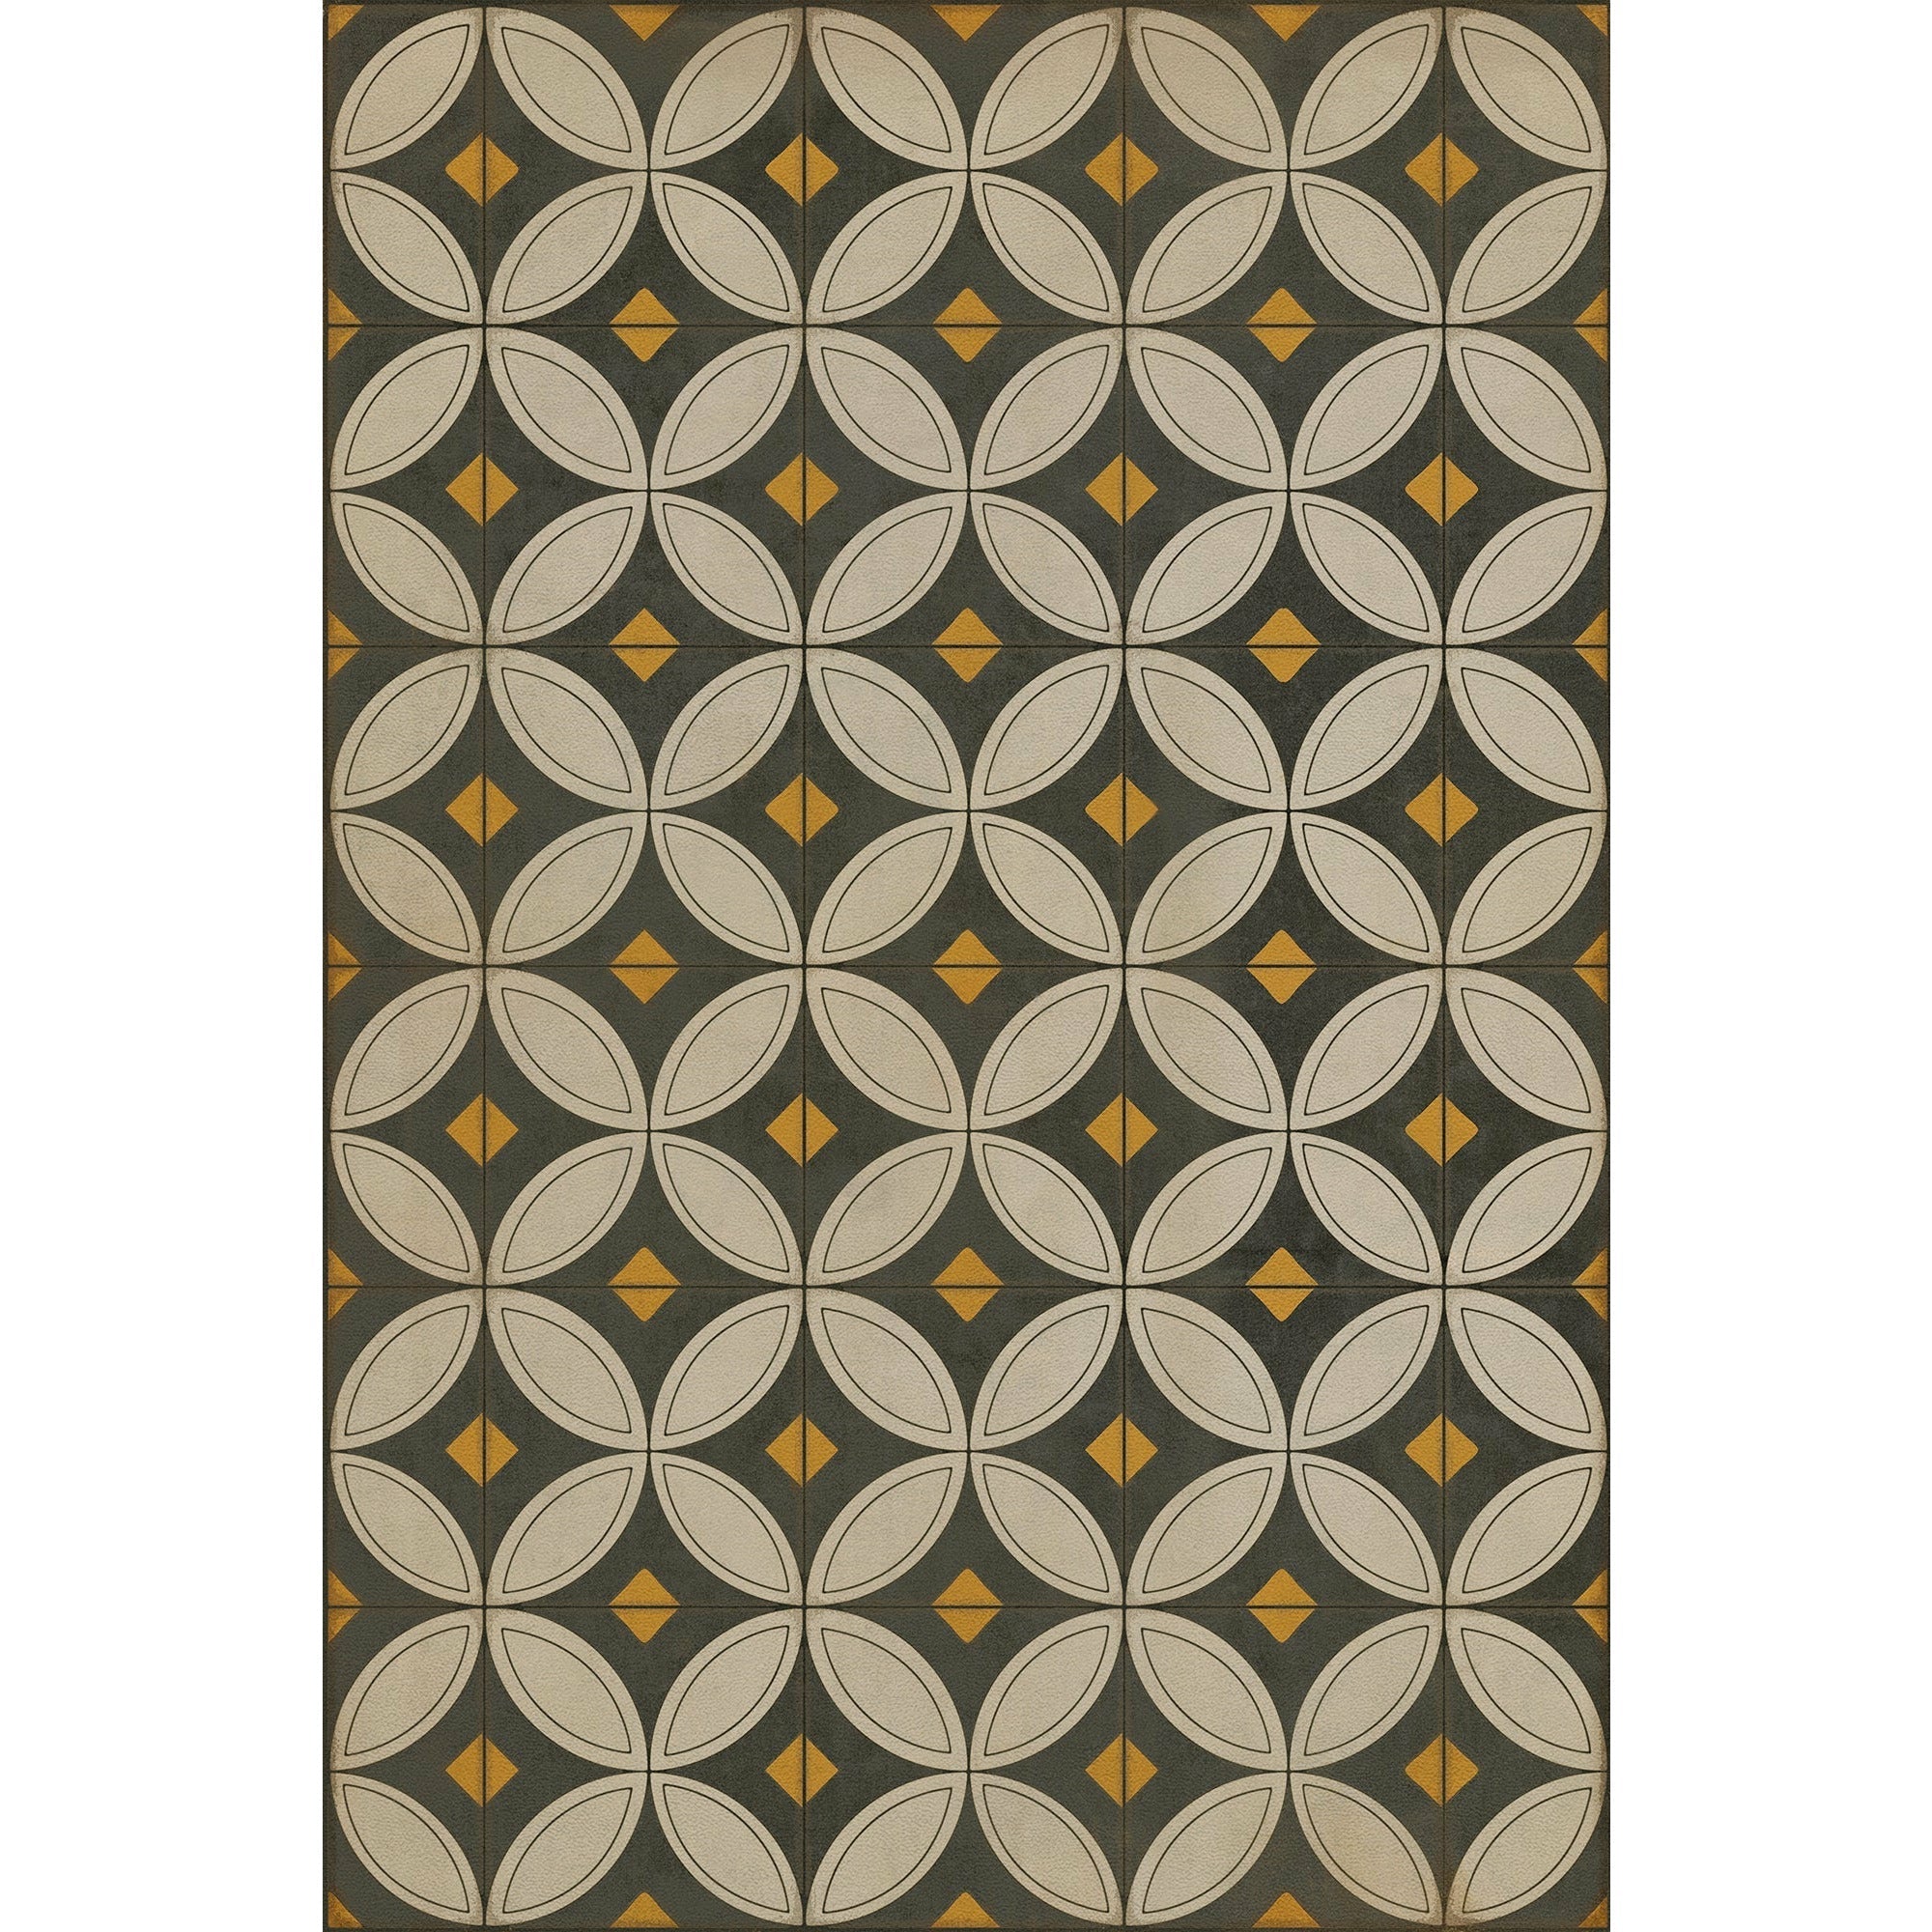 Pattern 70 May The Lights Guide You Home Vinyl Floor Cloth